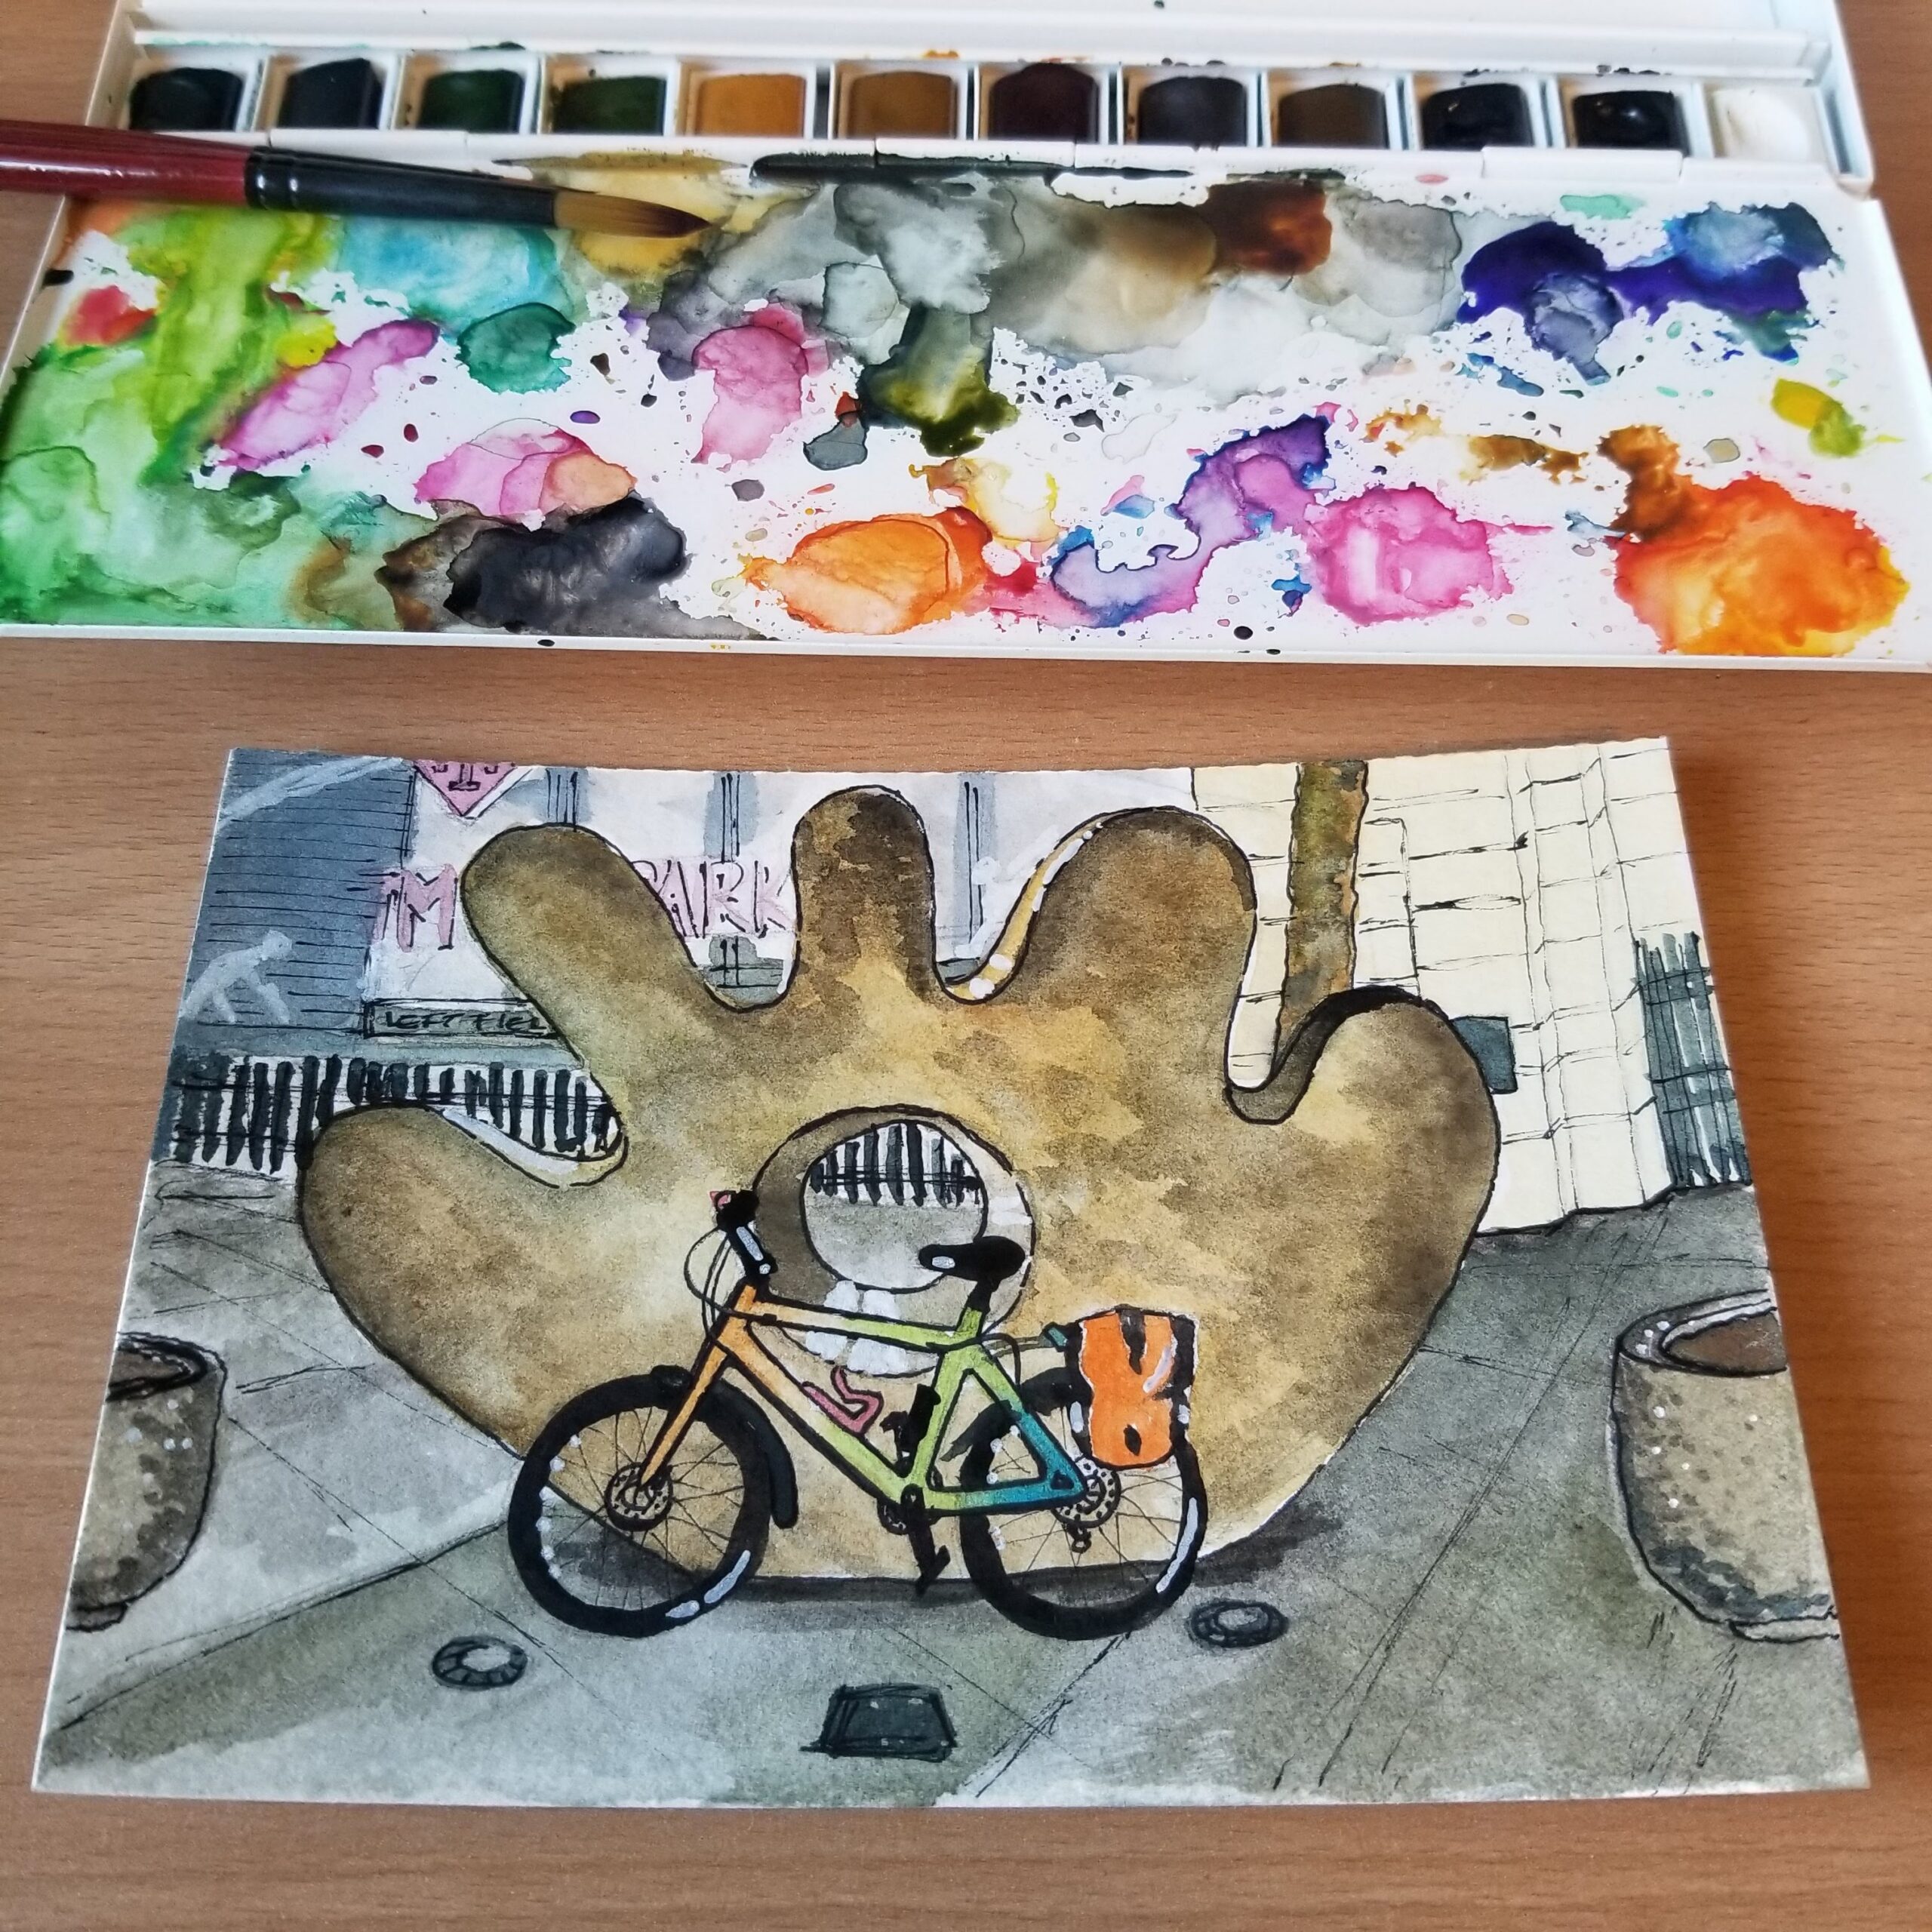 Watercolor postcard featuring a multi-colored commuter bike in front of Gerard Tsutakawa's sculpture, "The Mitt", at T-Mobile Park.